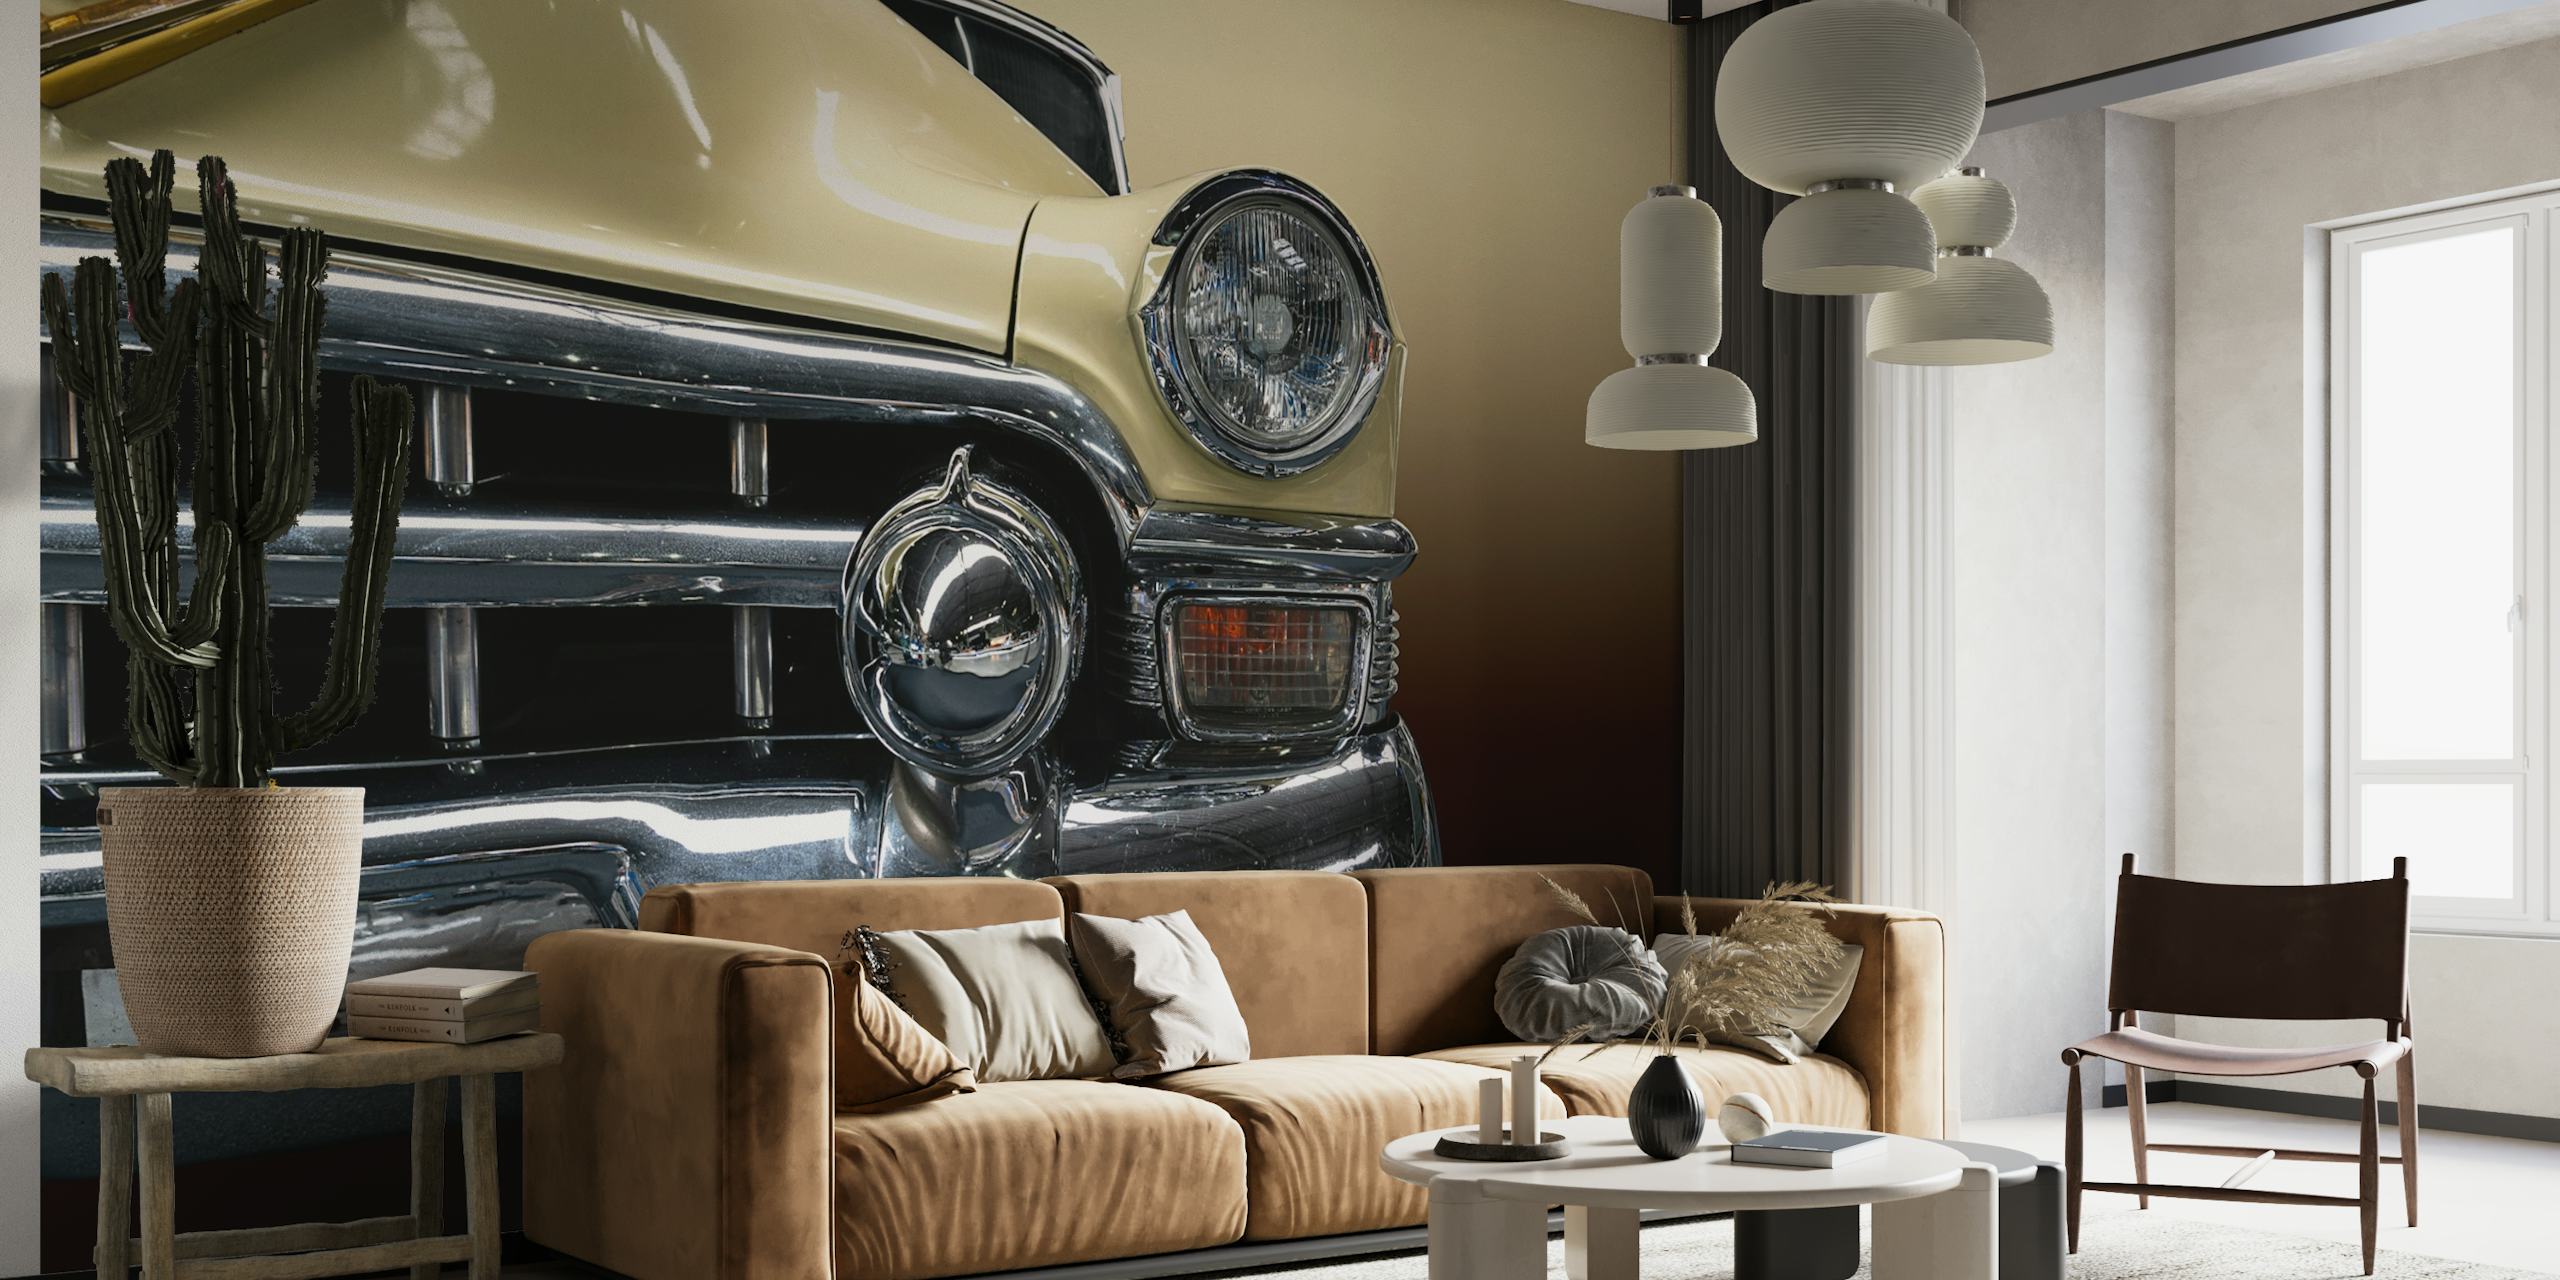 Vintage Beige Cadillac wall mural with chrome details